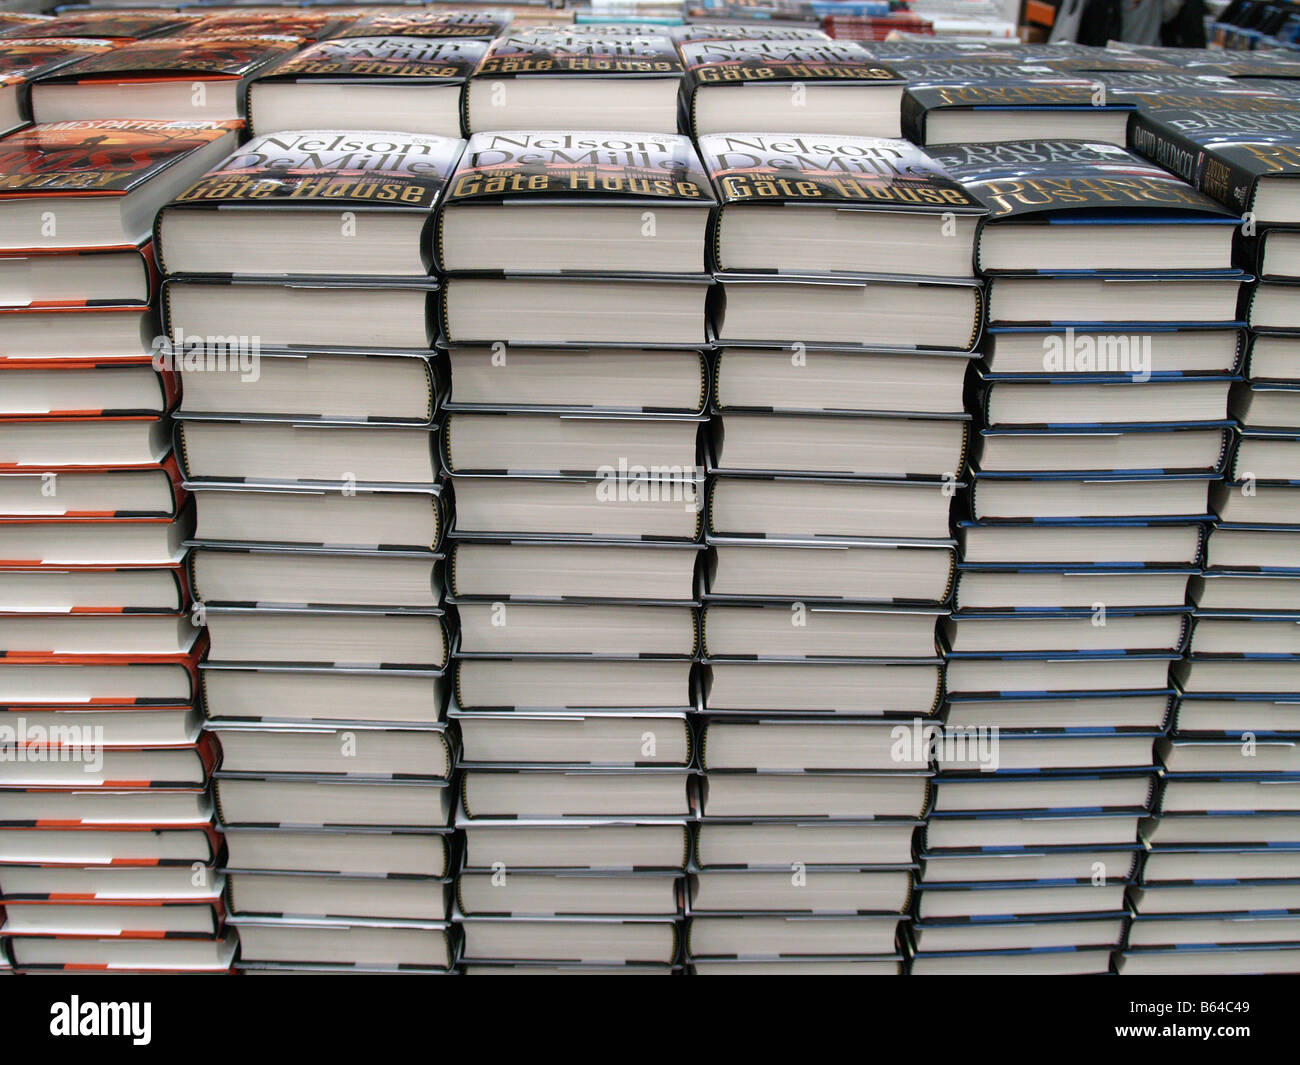 Stacks of books for sale in a Costco Wholesale big box store in the United States Stock Photo